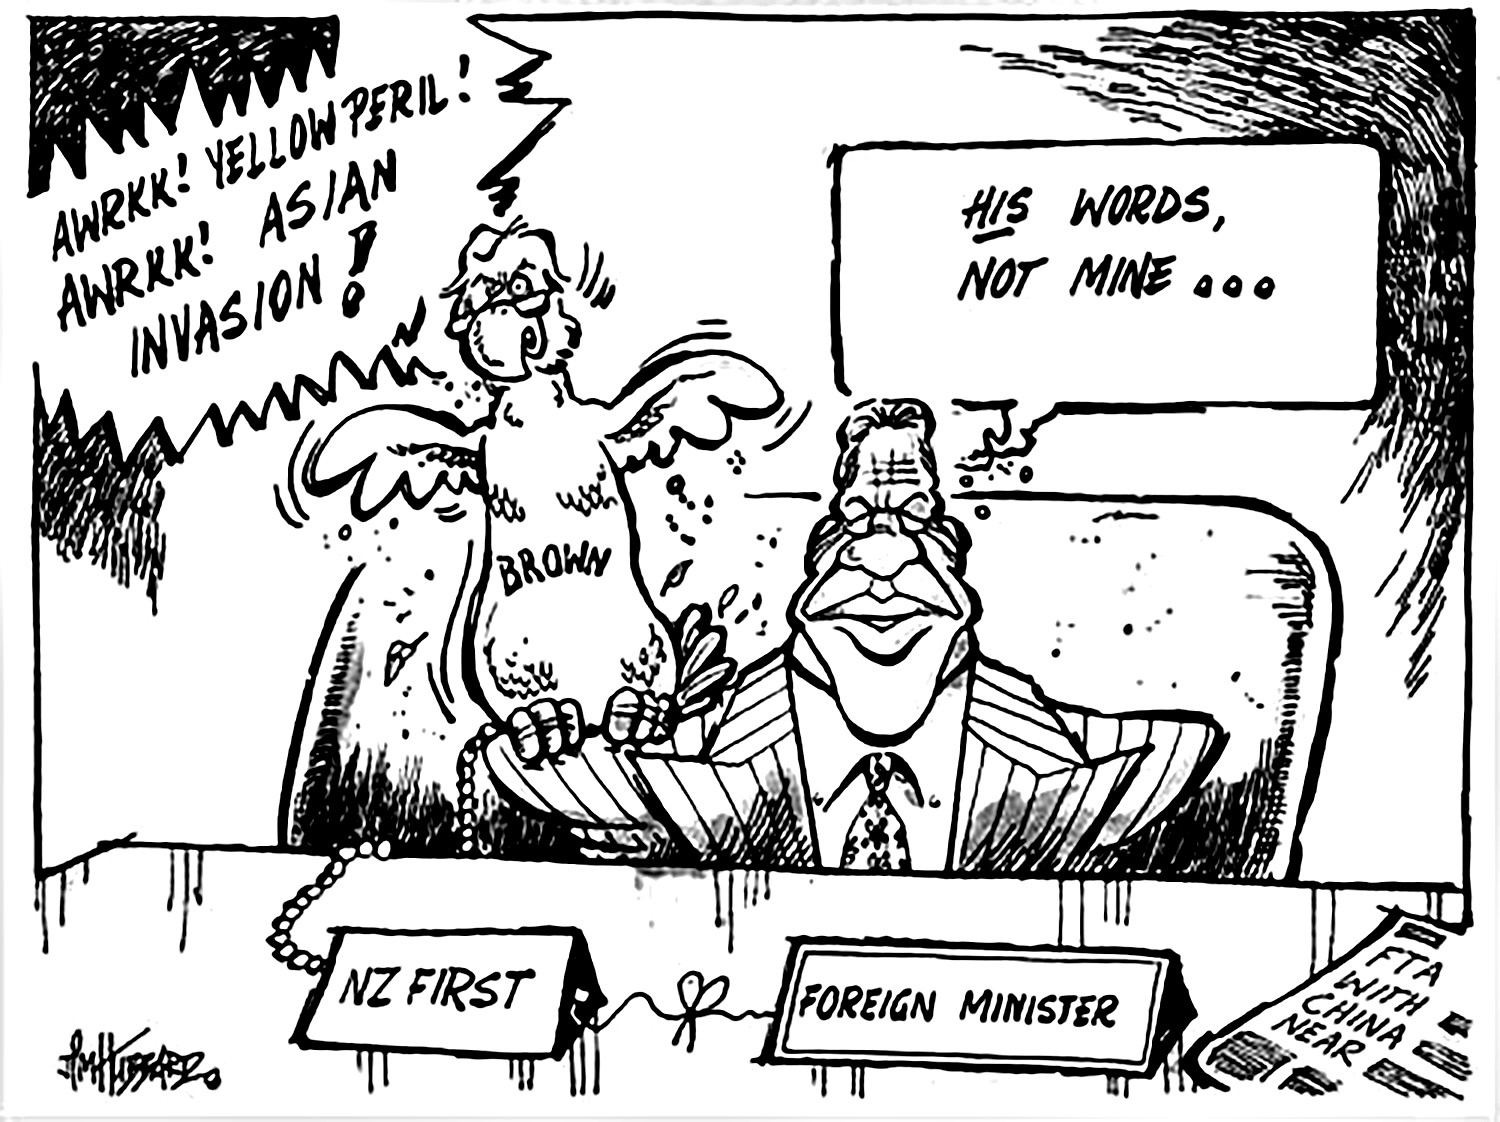 Cartoon of Winston Peters with a bird, pretending the bird is saying things about an 'Asian invasion'.